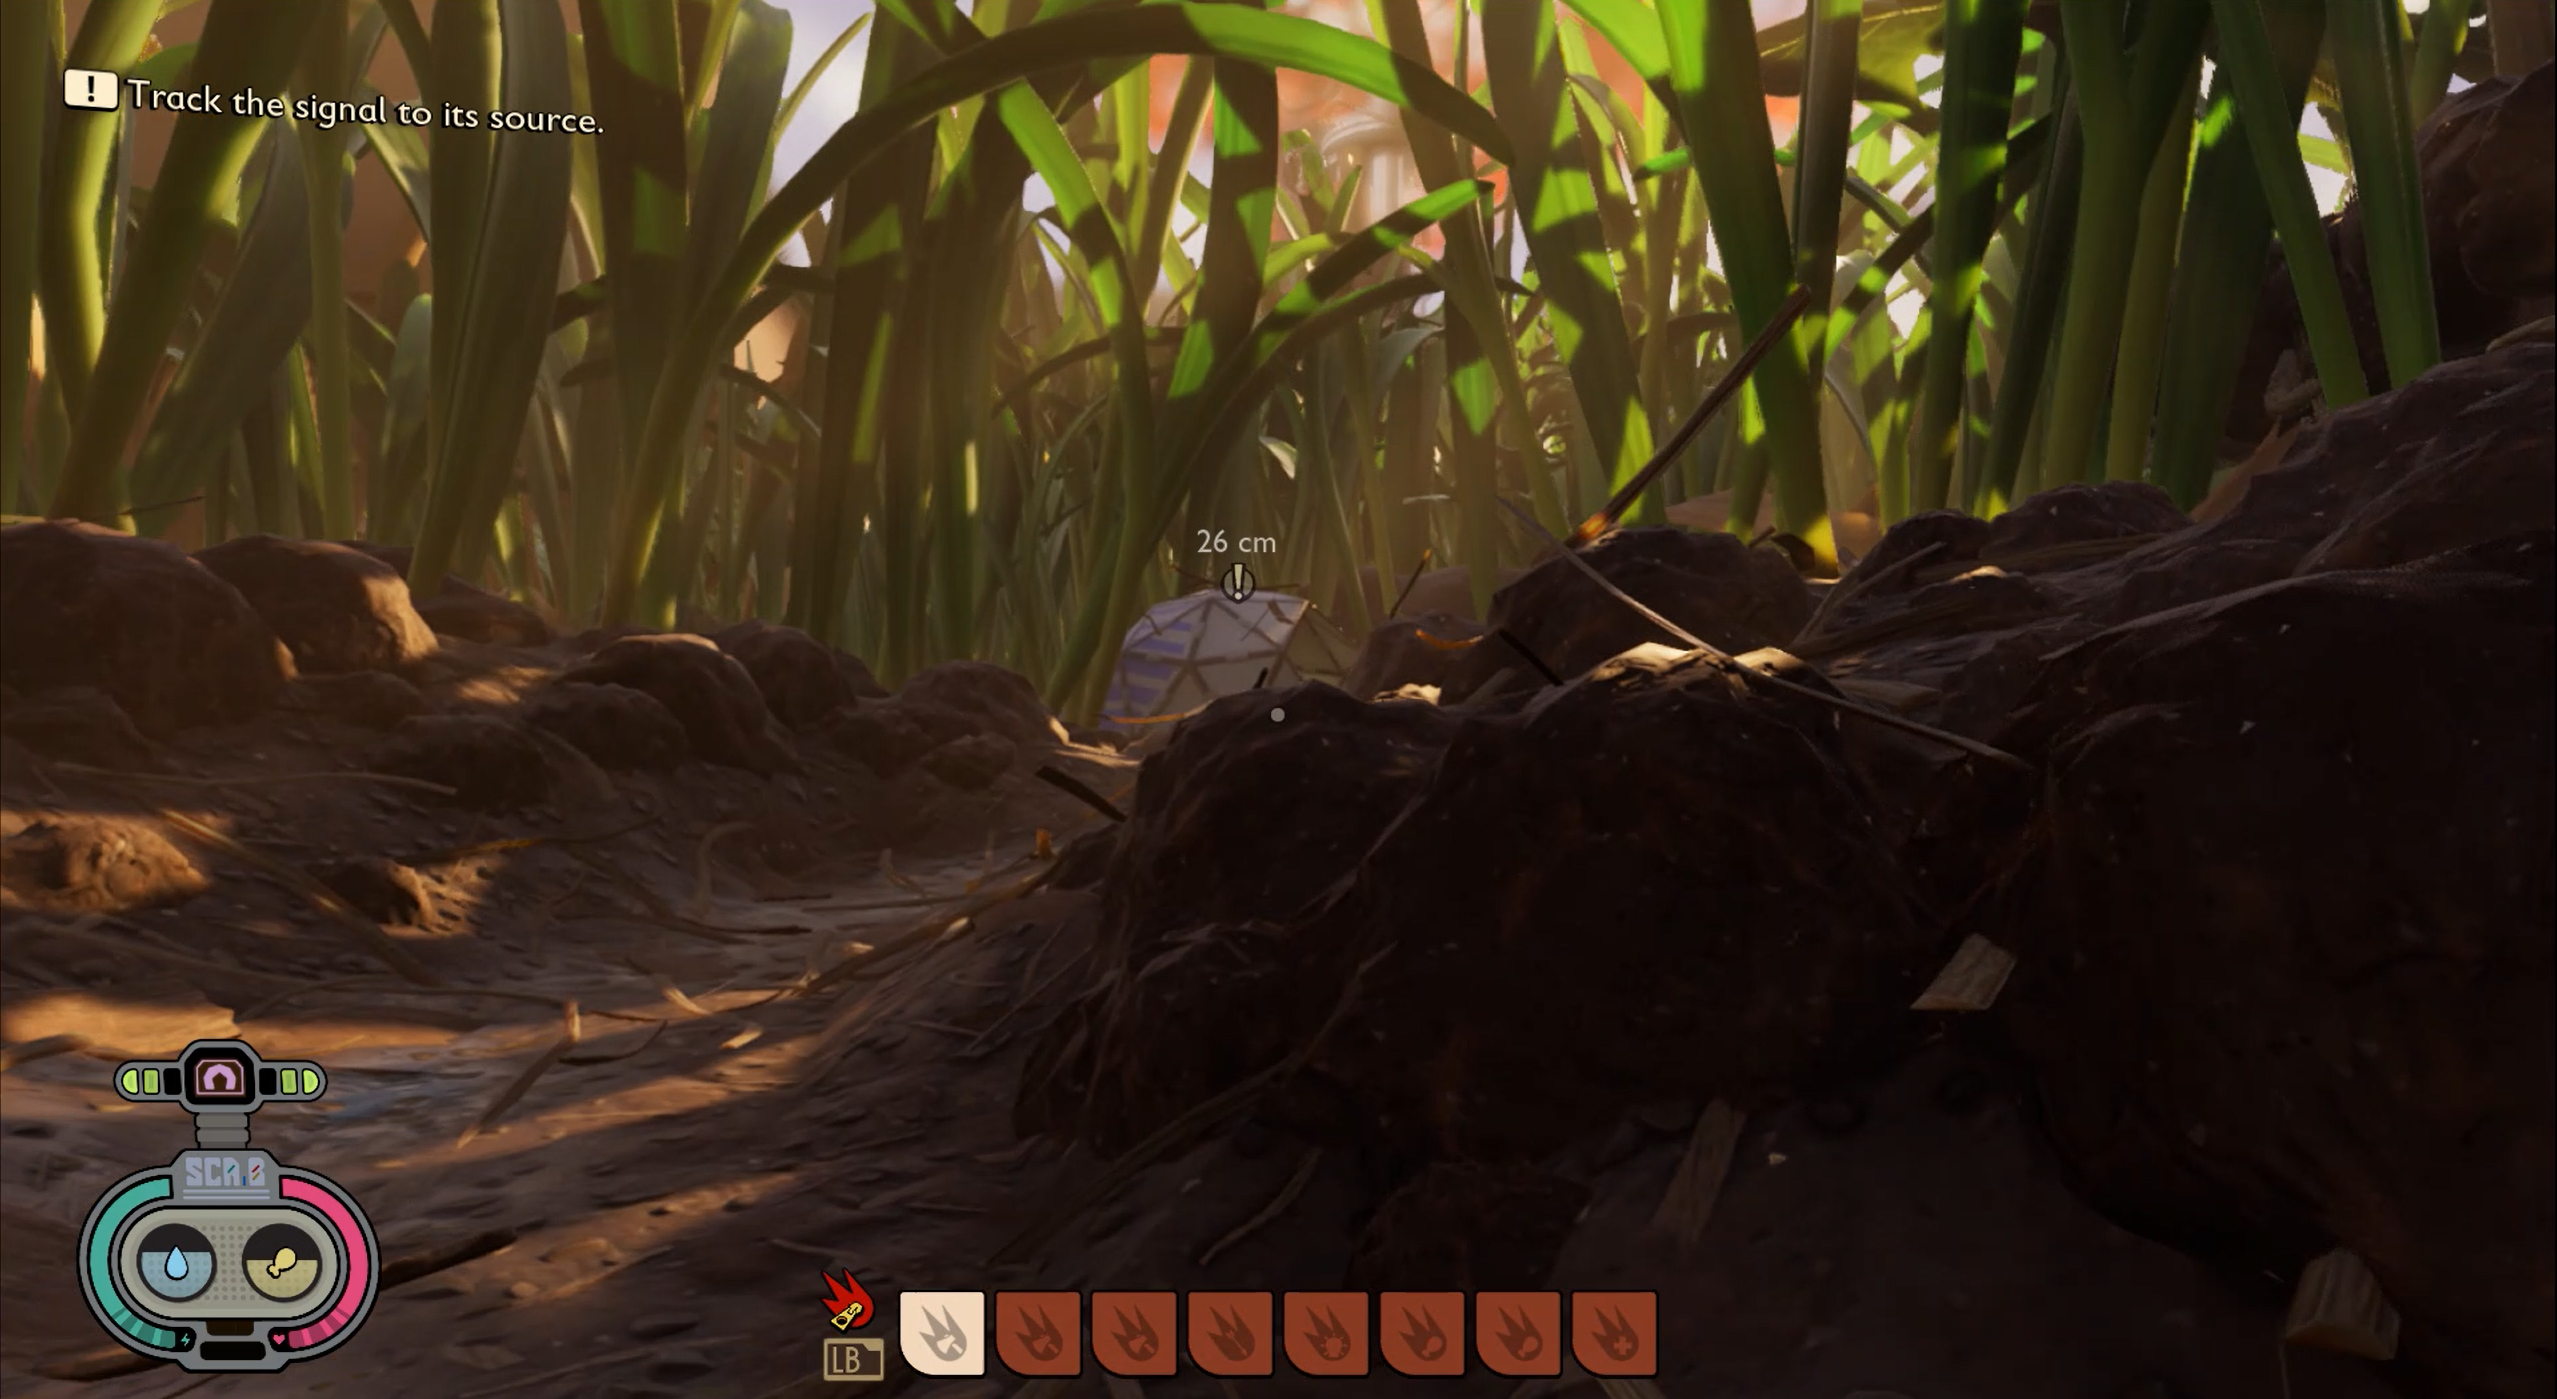 The player in Grounded follows a path through the tall grass to a multifaceted tent.